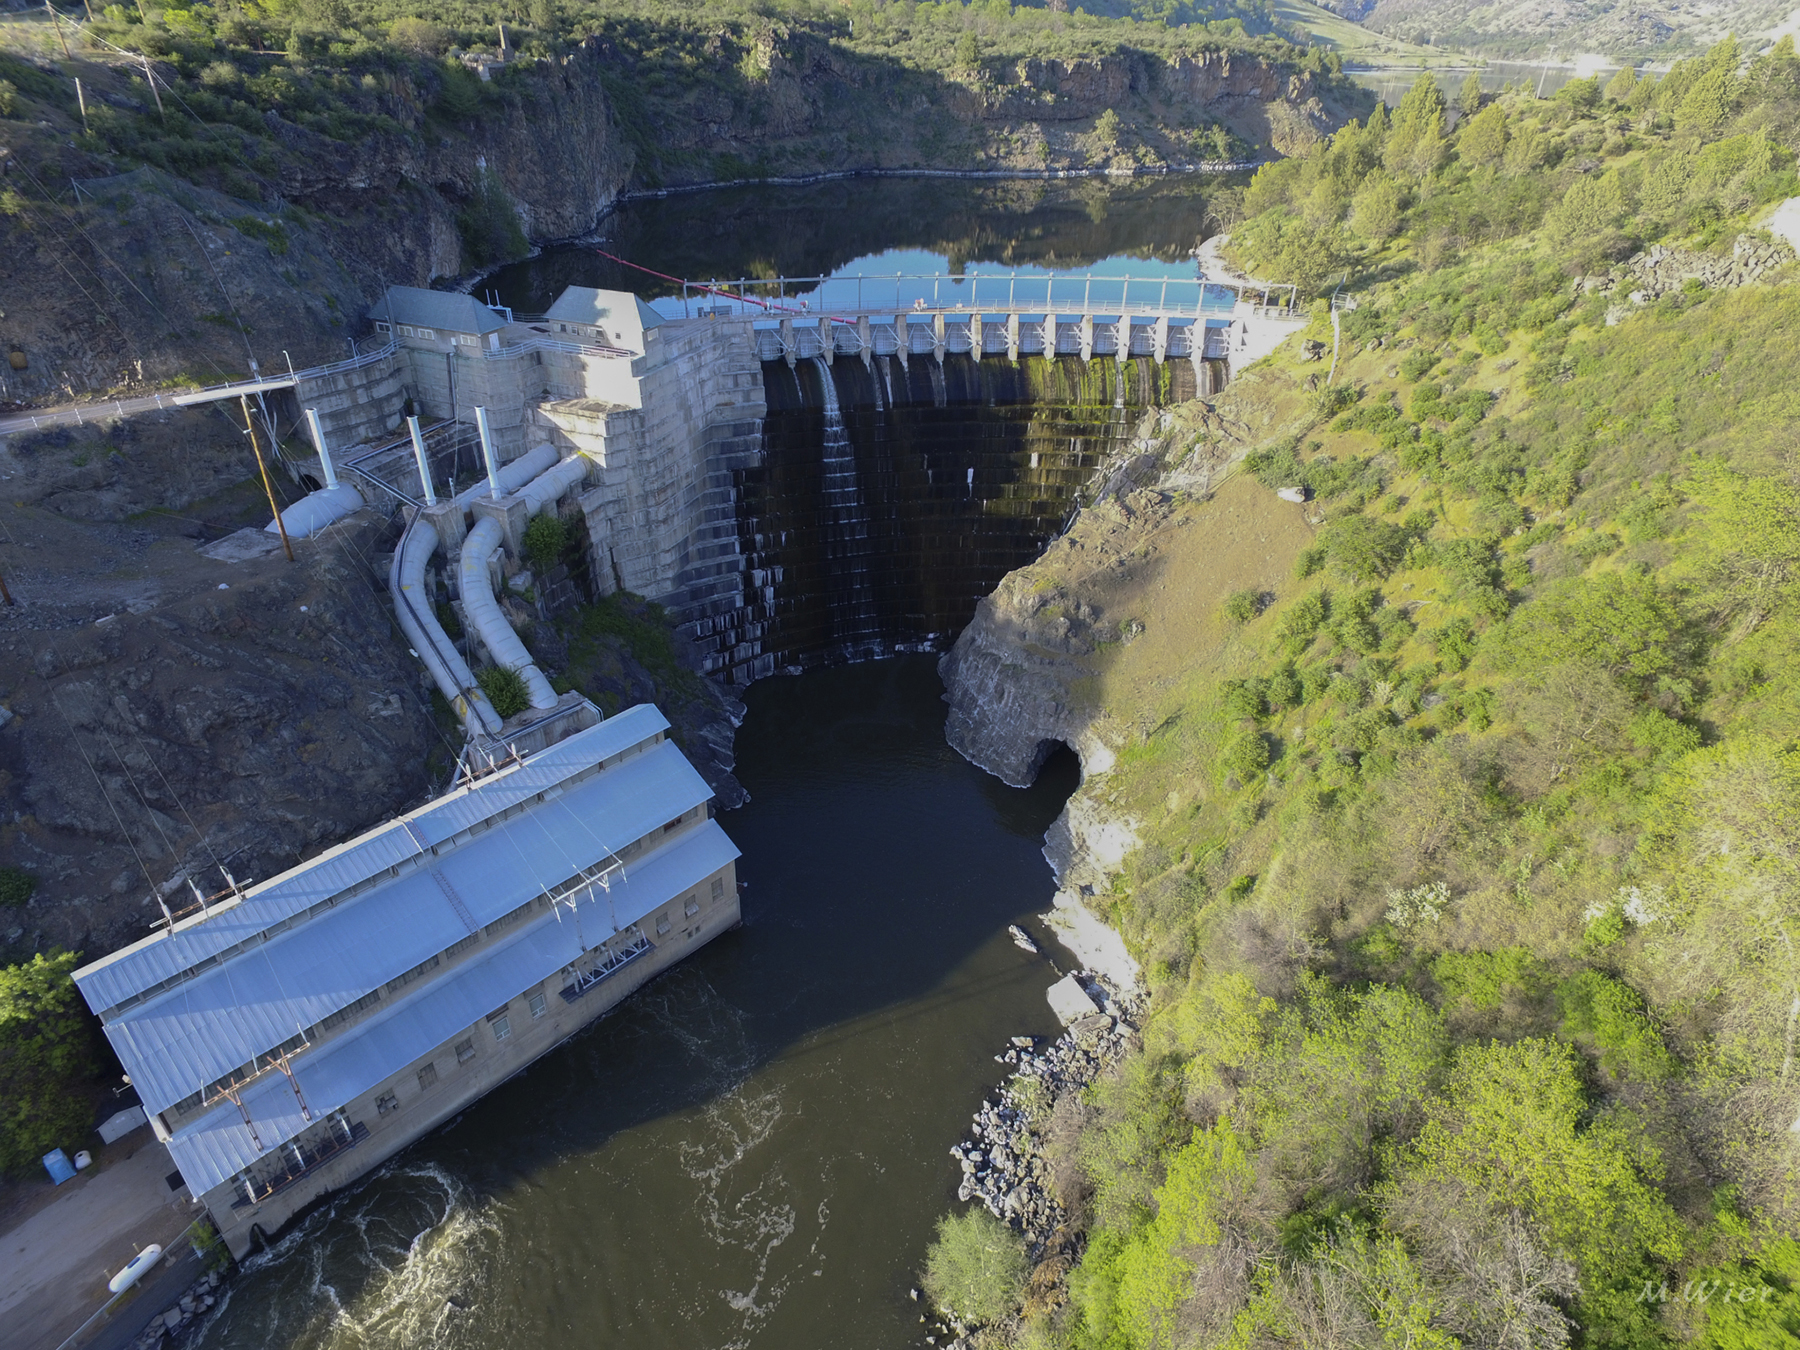 The 126 ft tall, 415 ft long Copco No. 1 Dam is a concrete gravity arch structure that was completed in California in 1918. (Image courtesy of Michael Wier/California Trout)